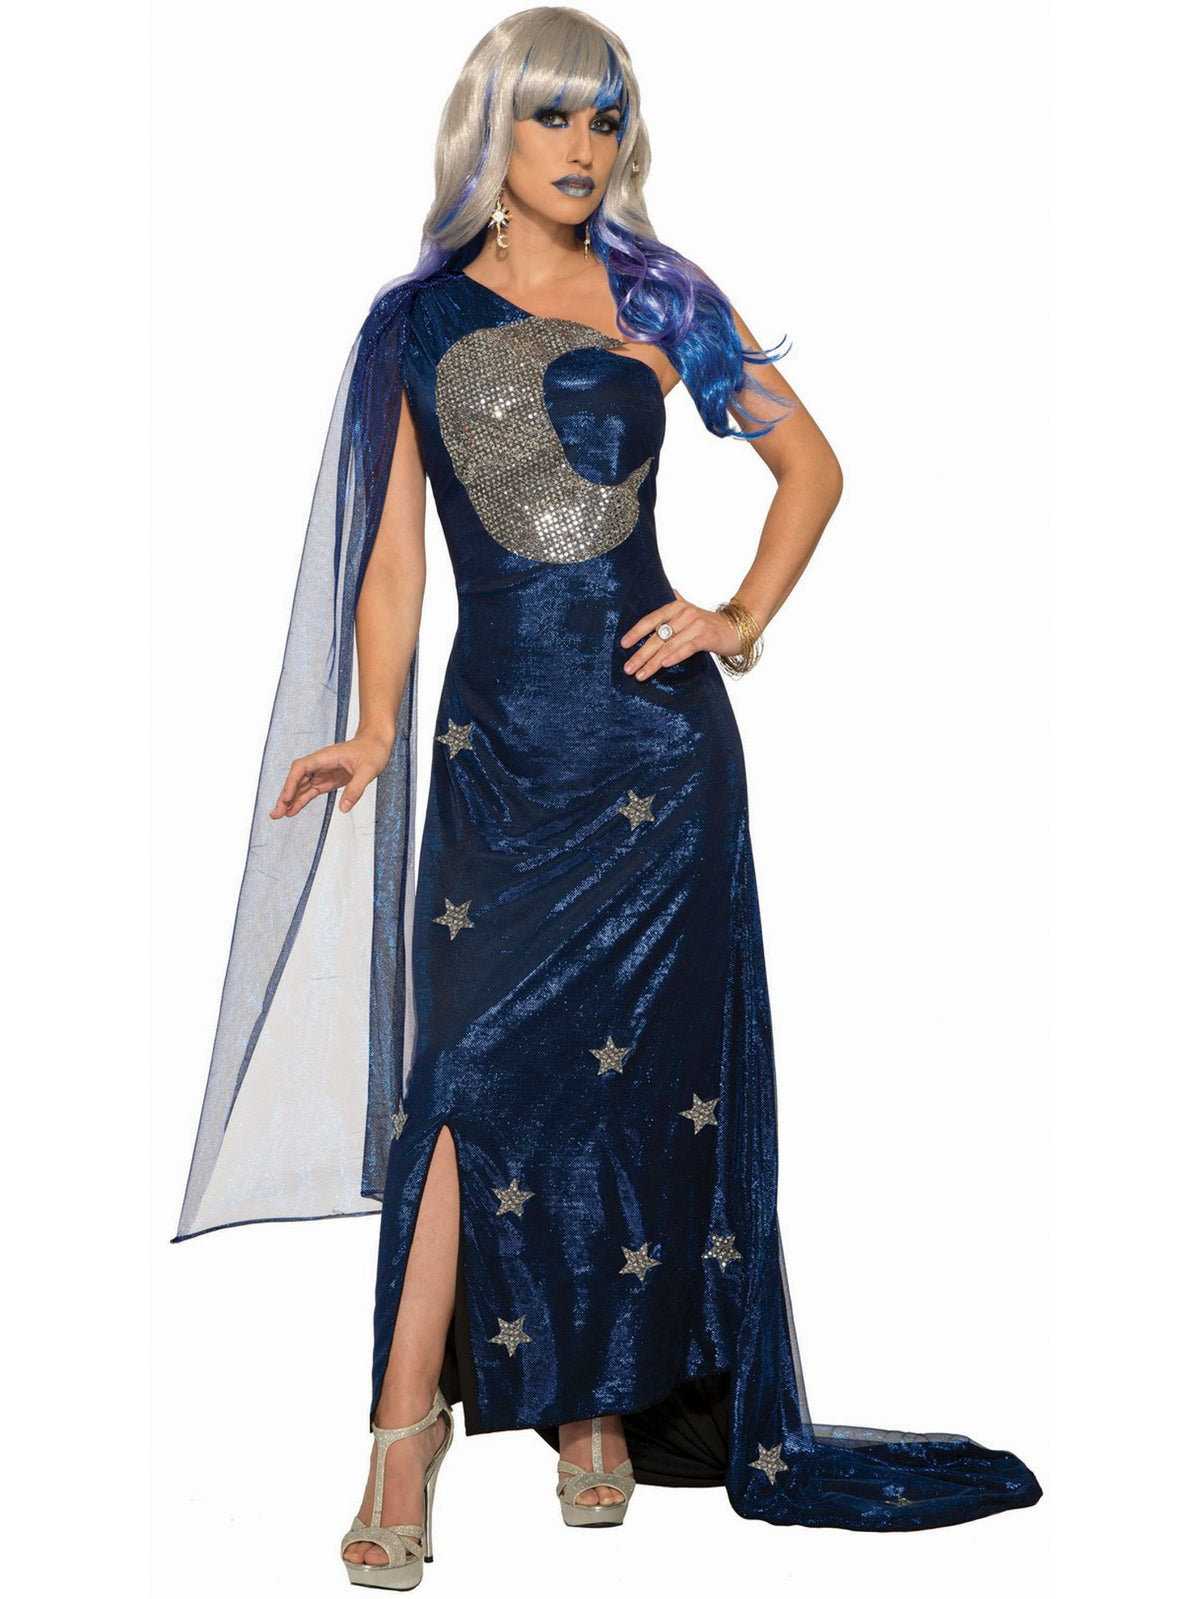 goddess of the moon costumes